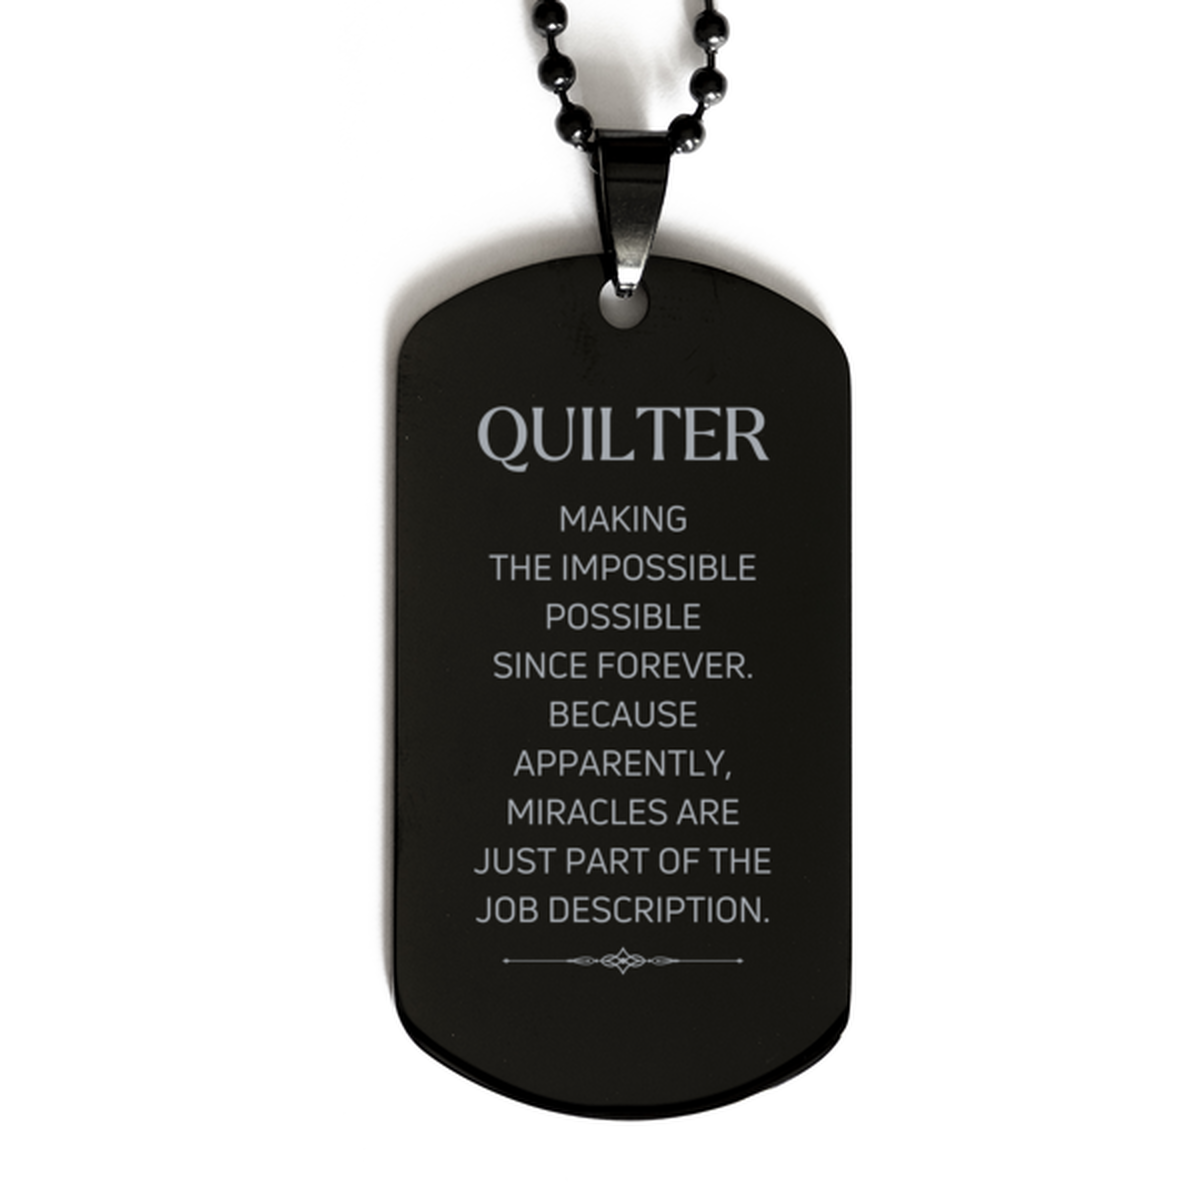 Funny Quilter Gifts, Miracles are just part of the job description, Inspirational Birthday Black Dog Tag For Quilter, Men, Women, Coworkers, Friends, Boss